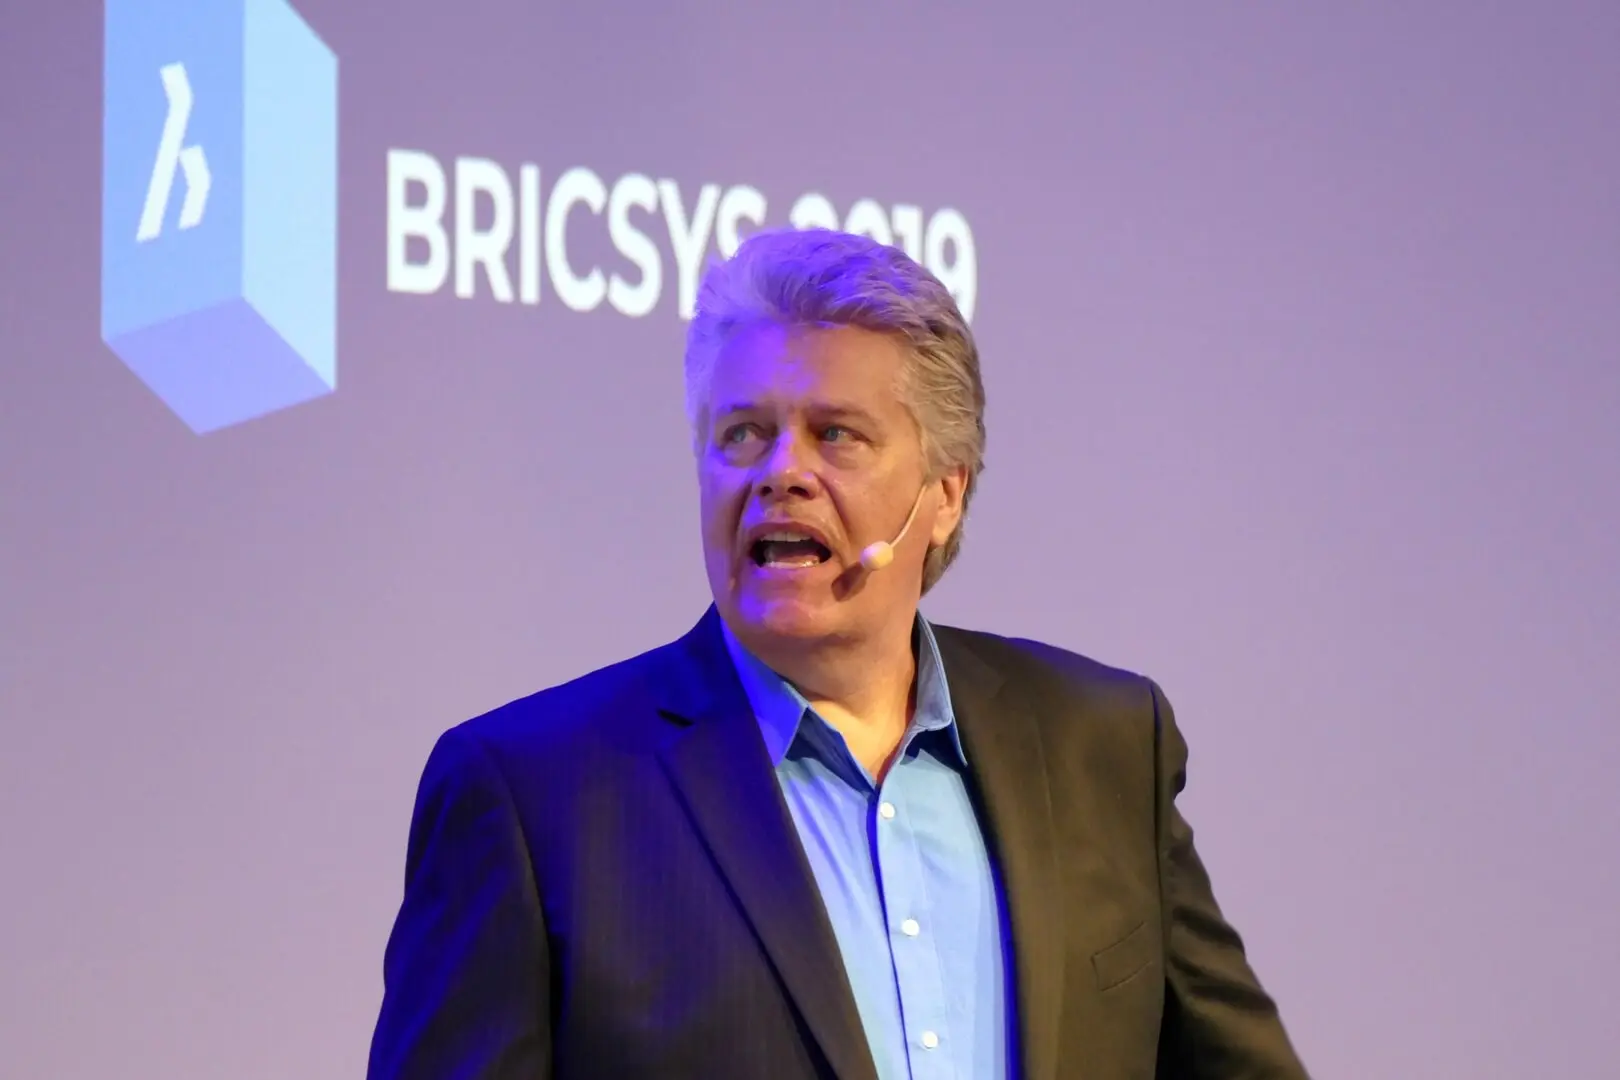 This was Bricsys Conference 2019- 5